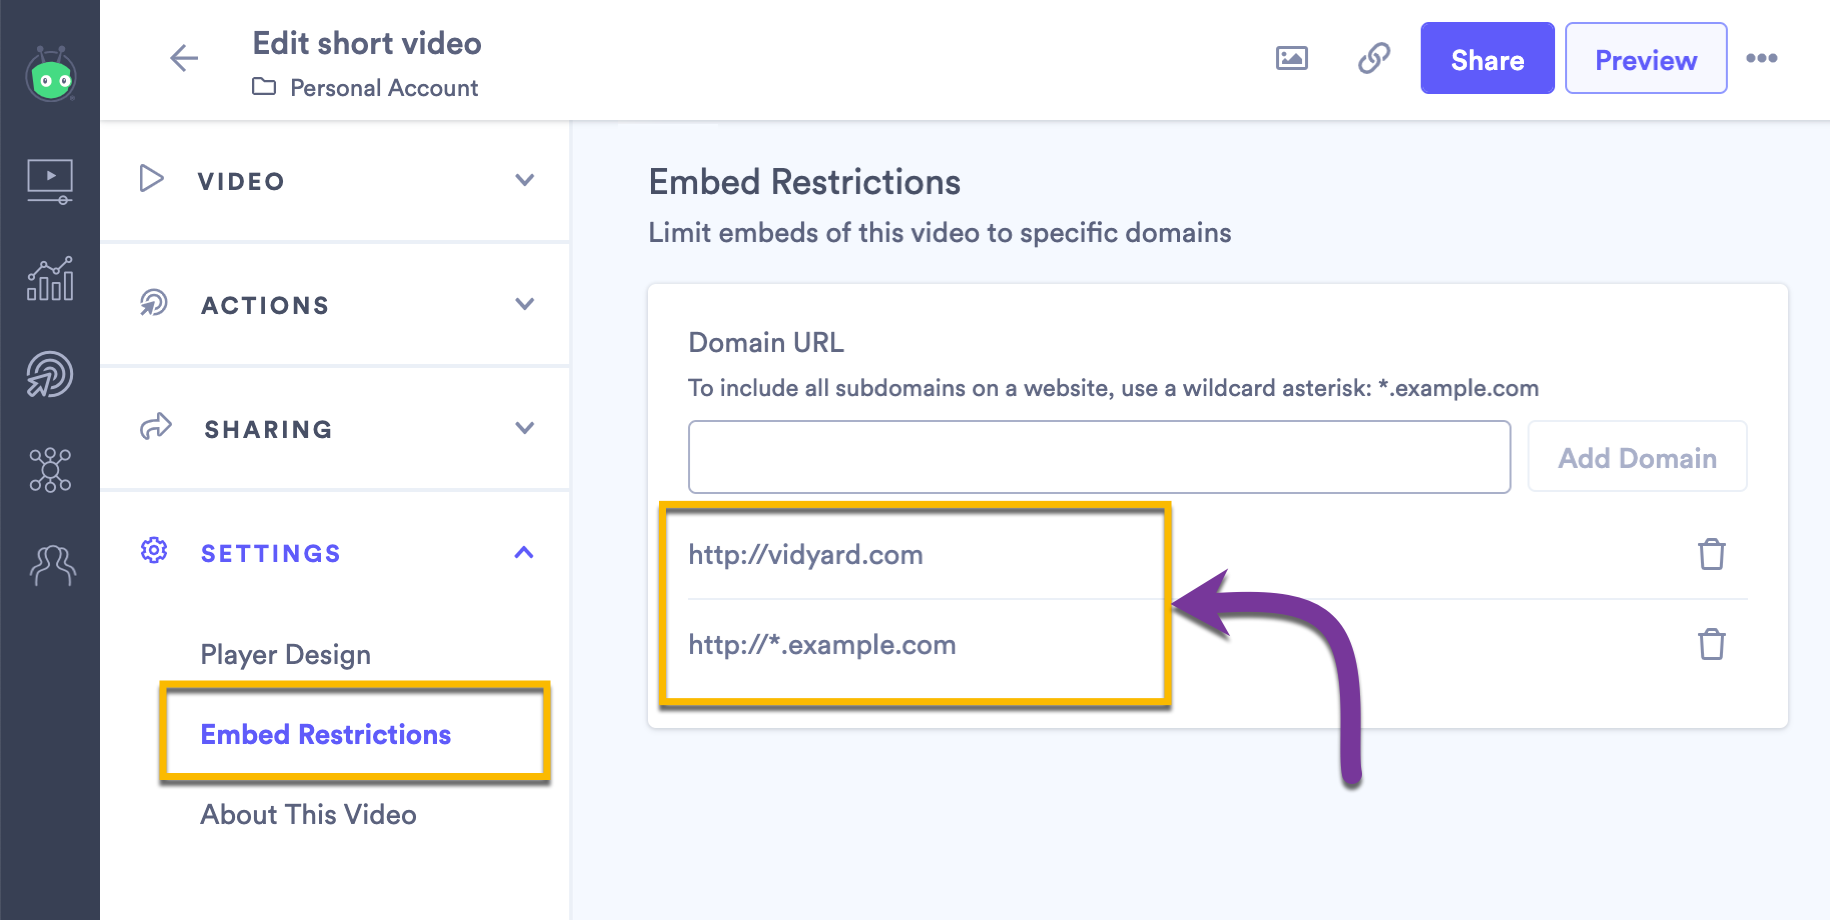 Video settings page showing domains that allow embedding